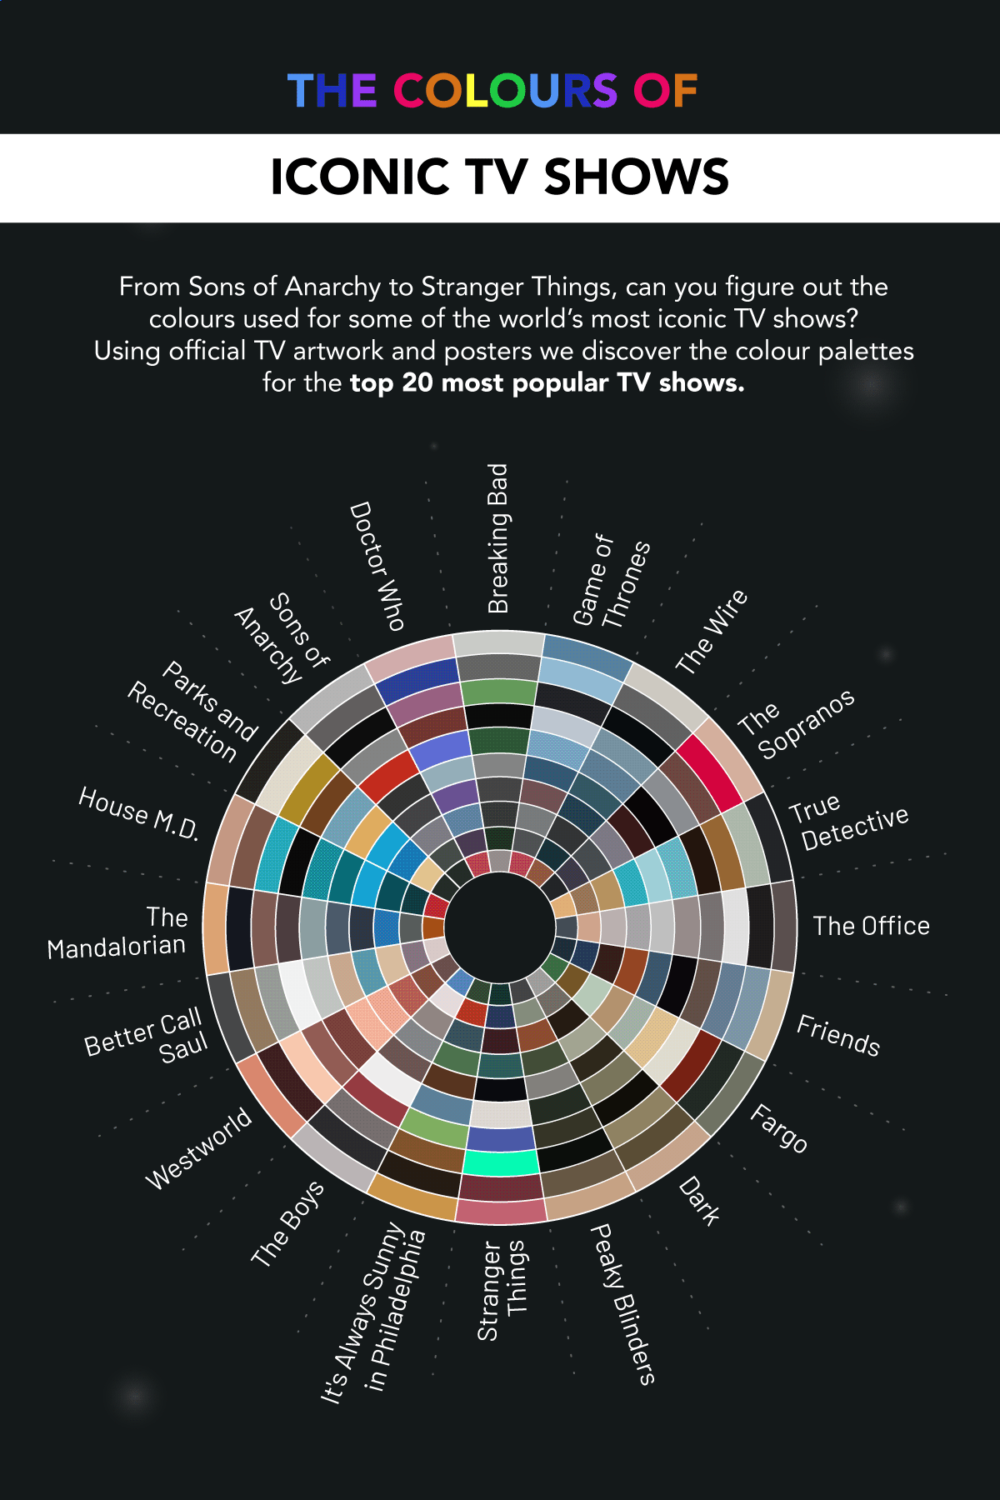 Colour palette of world's most popular TV shows